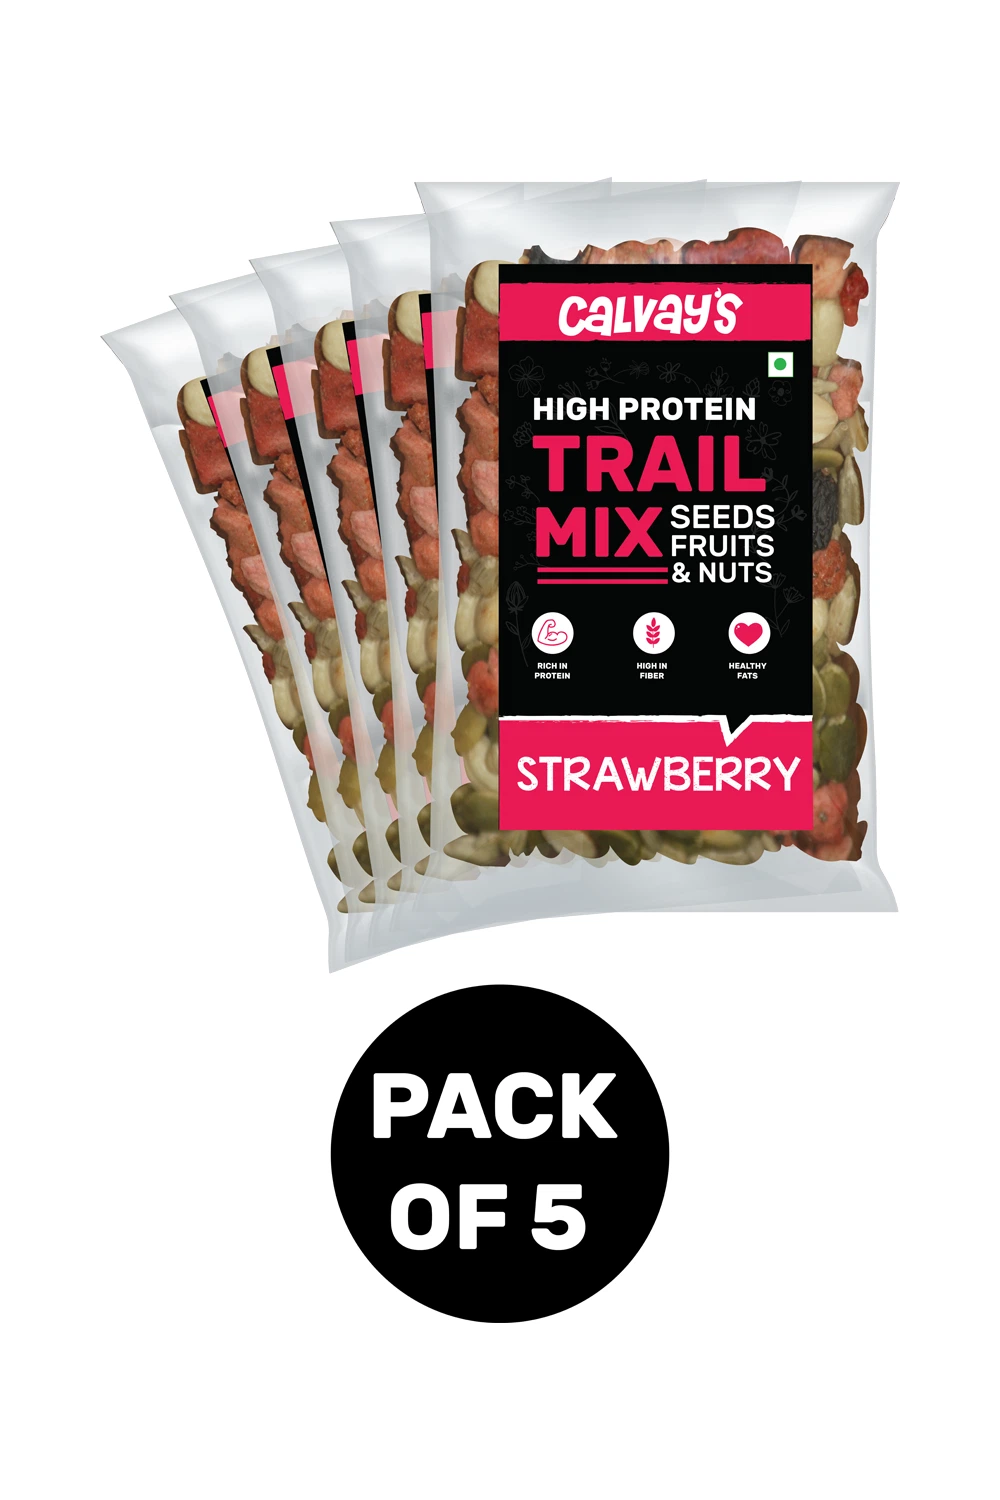 High Protein Trail Mix by Calvays Strawberry